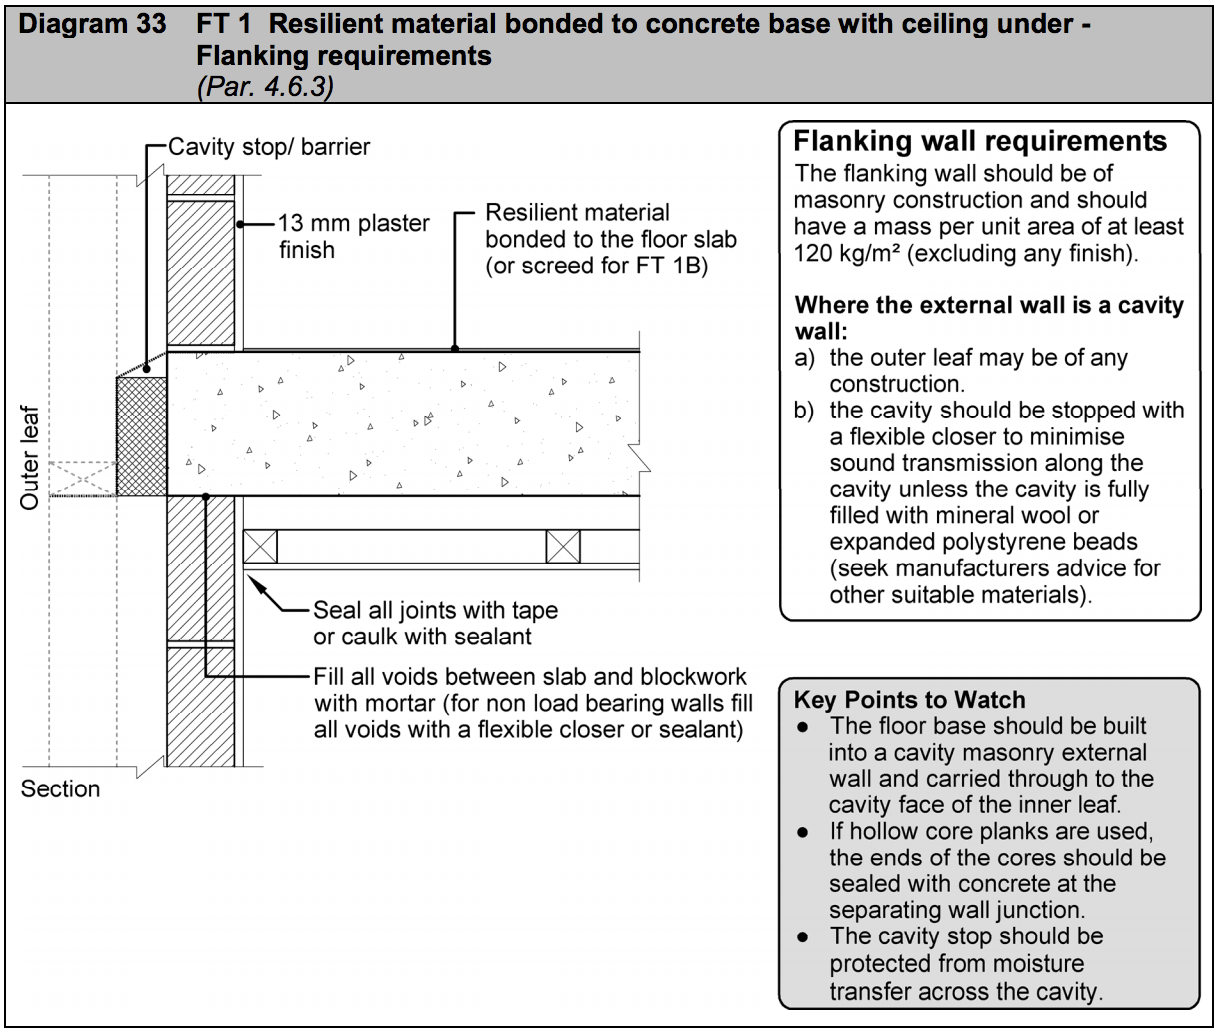 Diagram HE33 - FT 1 Resilient material bonded to concrete base with ceiling under - flanking requirements - Extract from TGD E